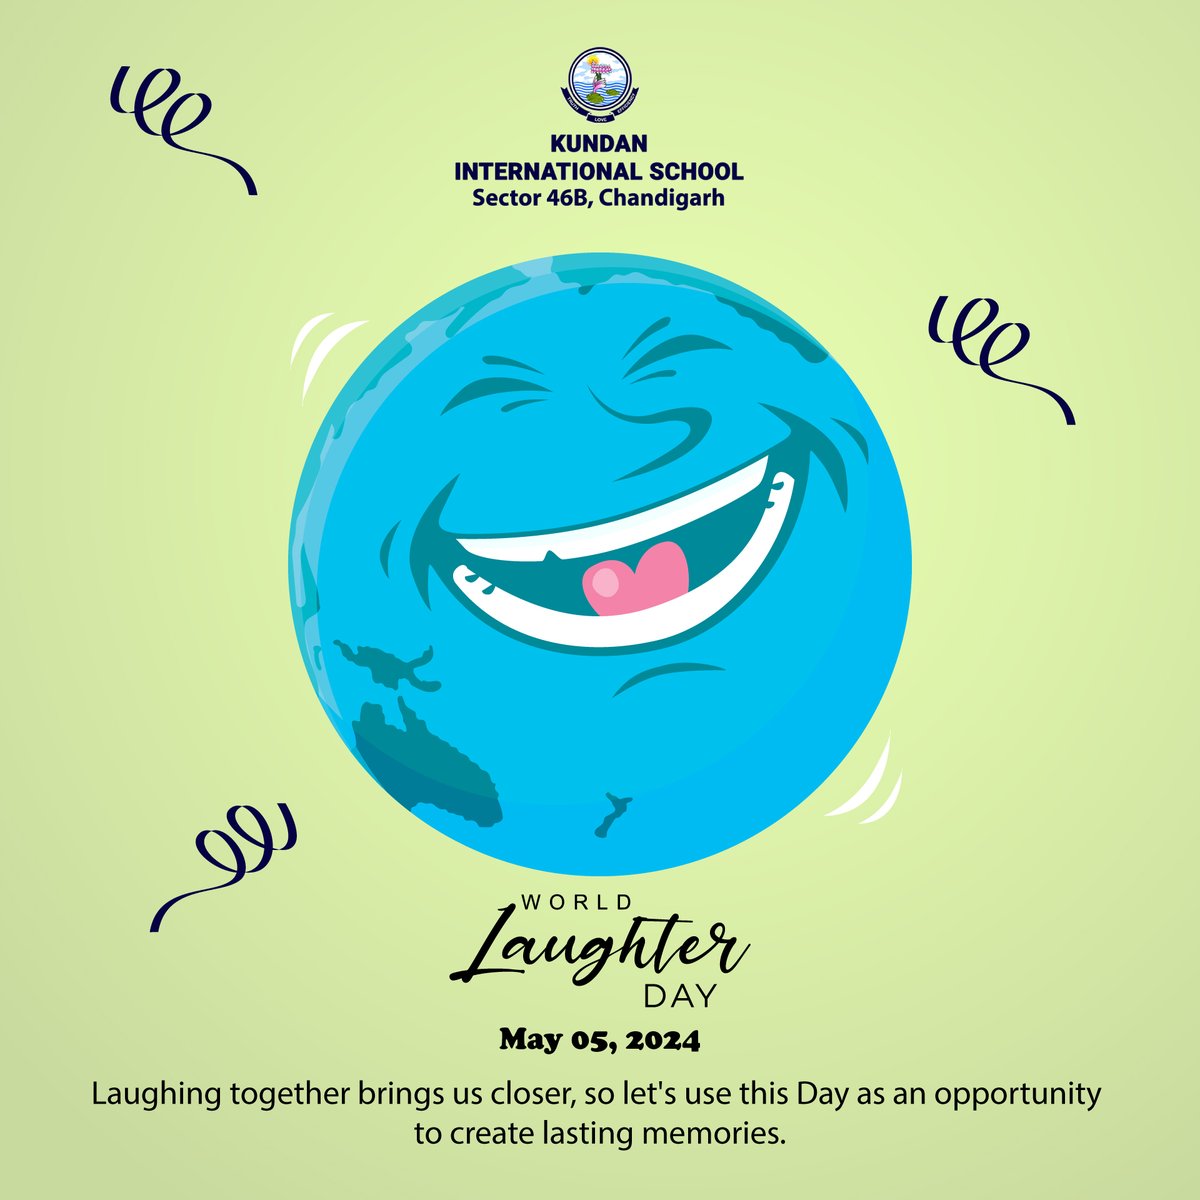 Every laugh has a story to tell, and every story has the power to inspire. On World Laughter Day, let's listen to the laughter around us and appreciate the stories behind them✨😃

#WorldLaughterDay #SpreadHappiness #KundanInternationalSchool #SchoolInChandigarh #SchoolSpirit